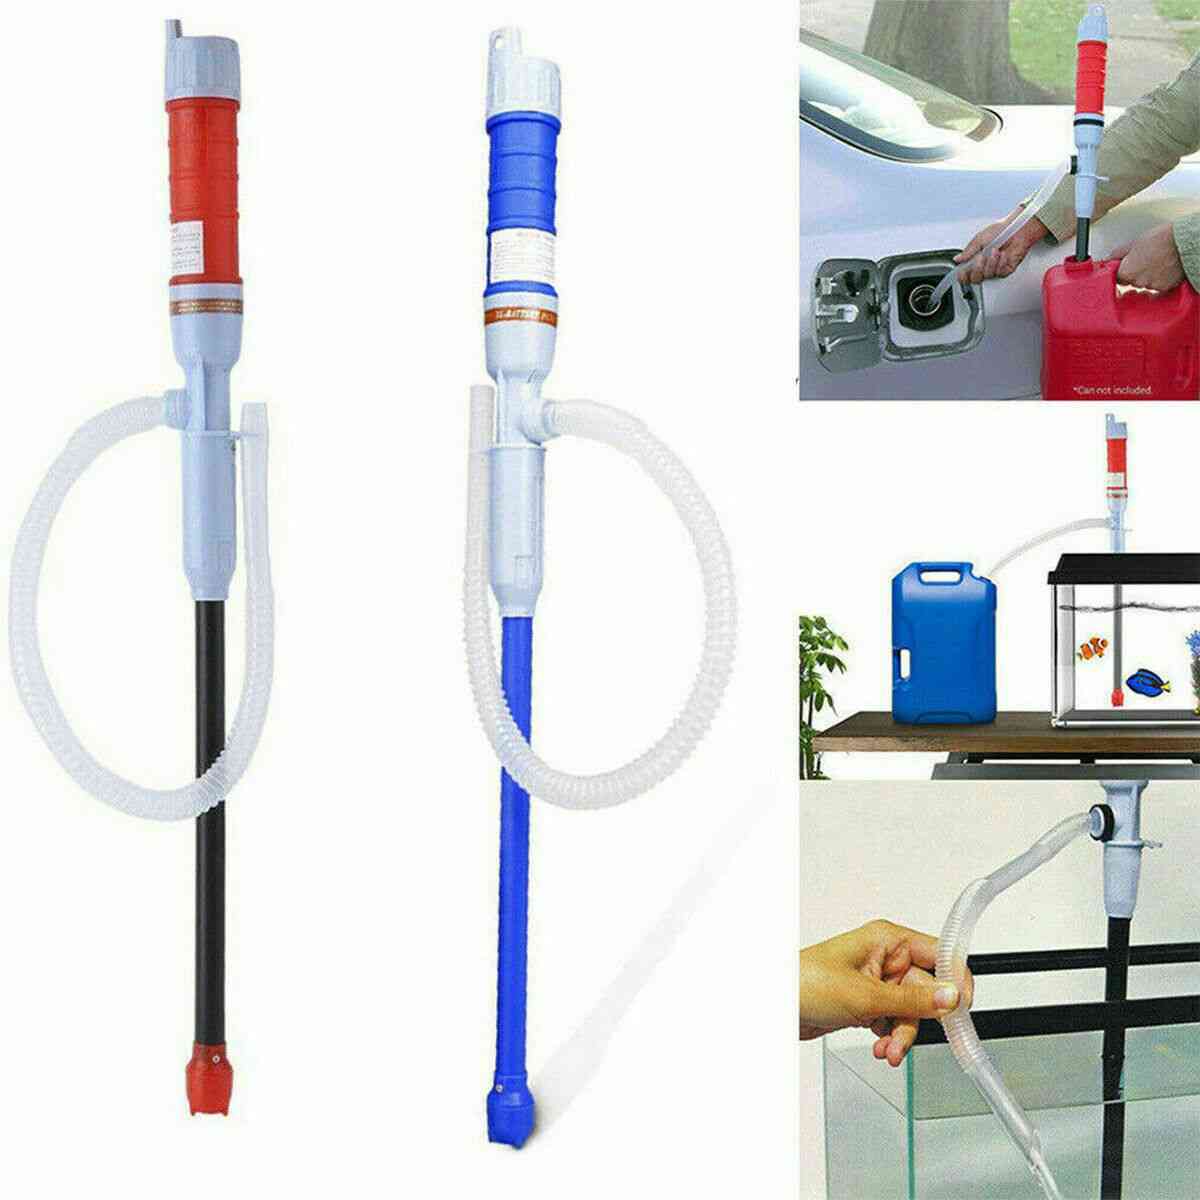 Handheld Liquid Fuel Syphon Pump - Automatic Transfer Gas, Oil, Water